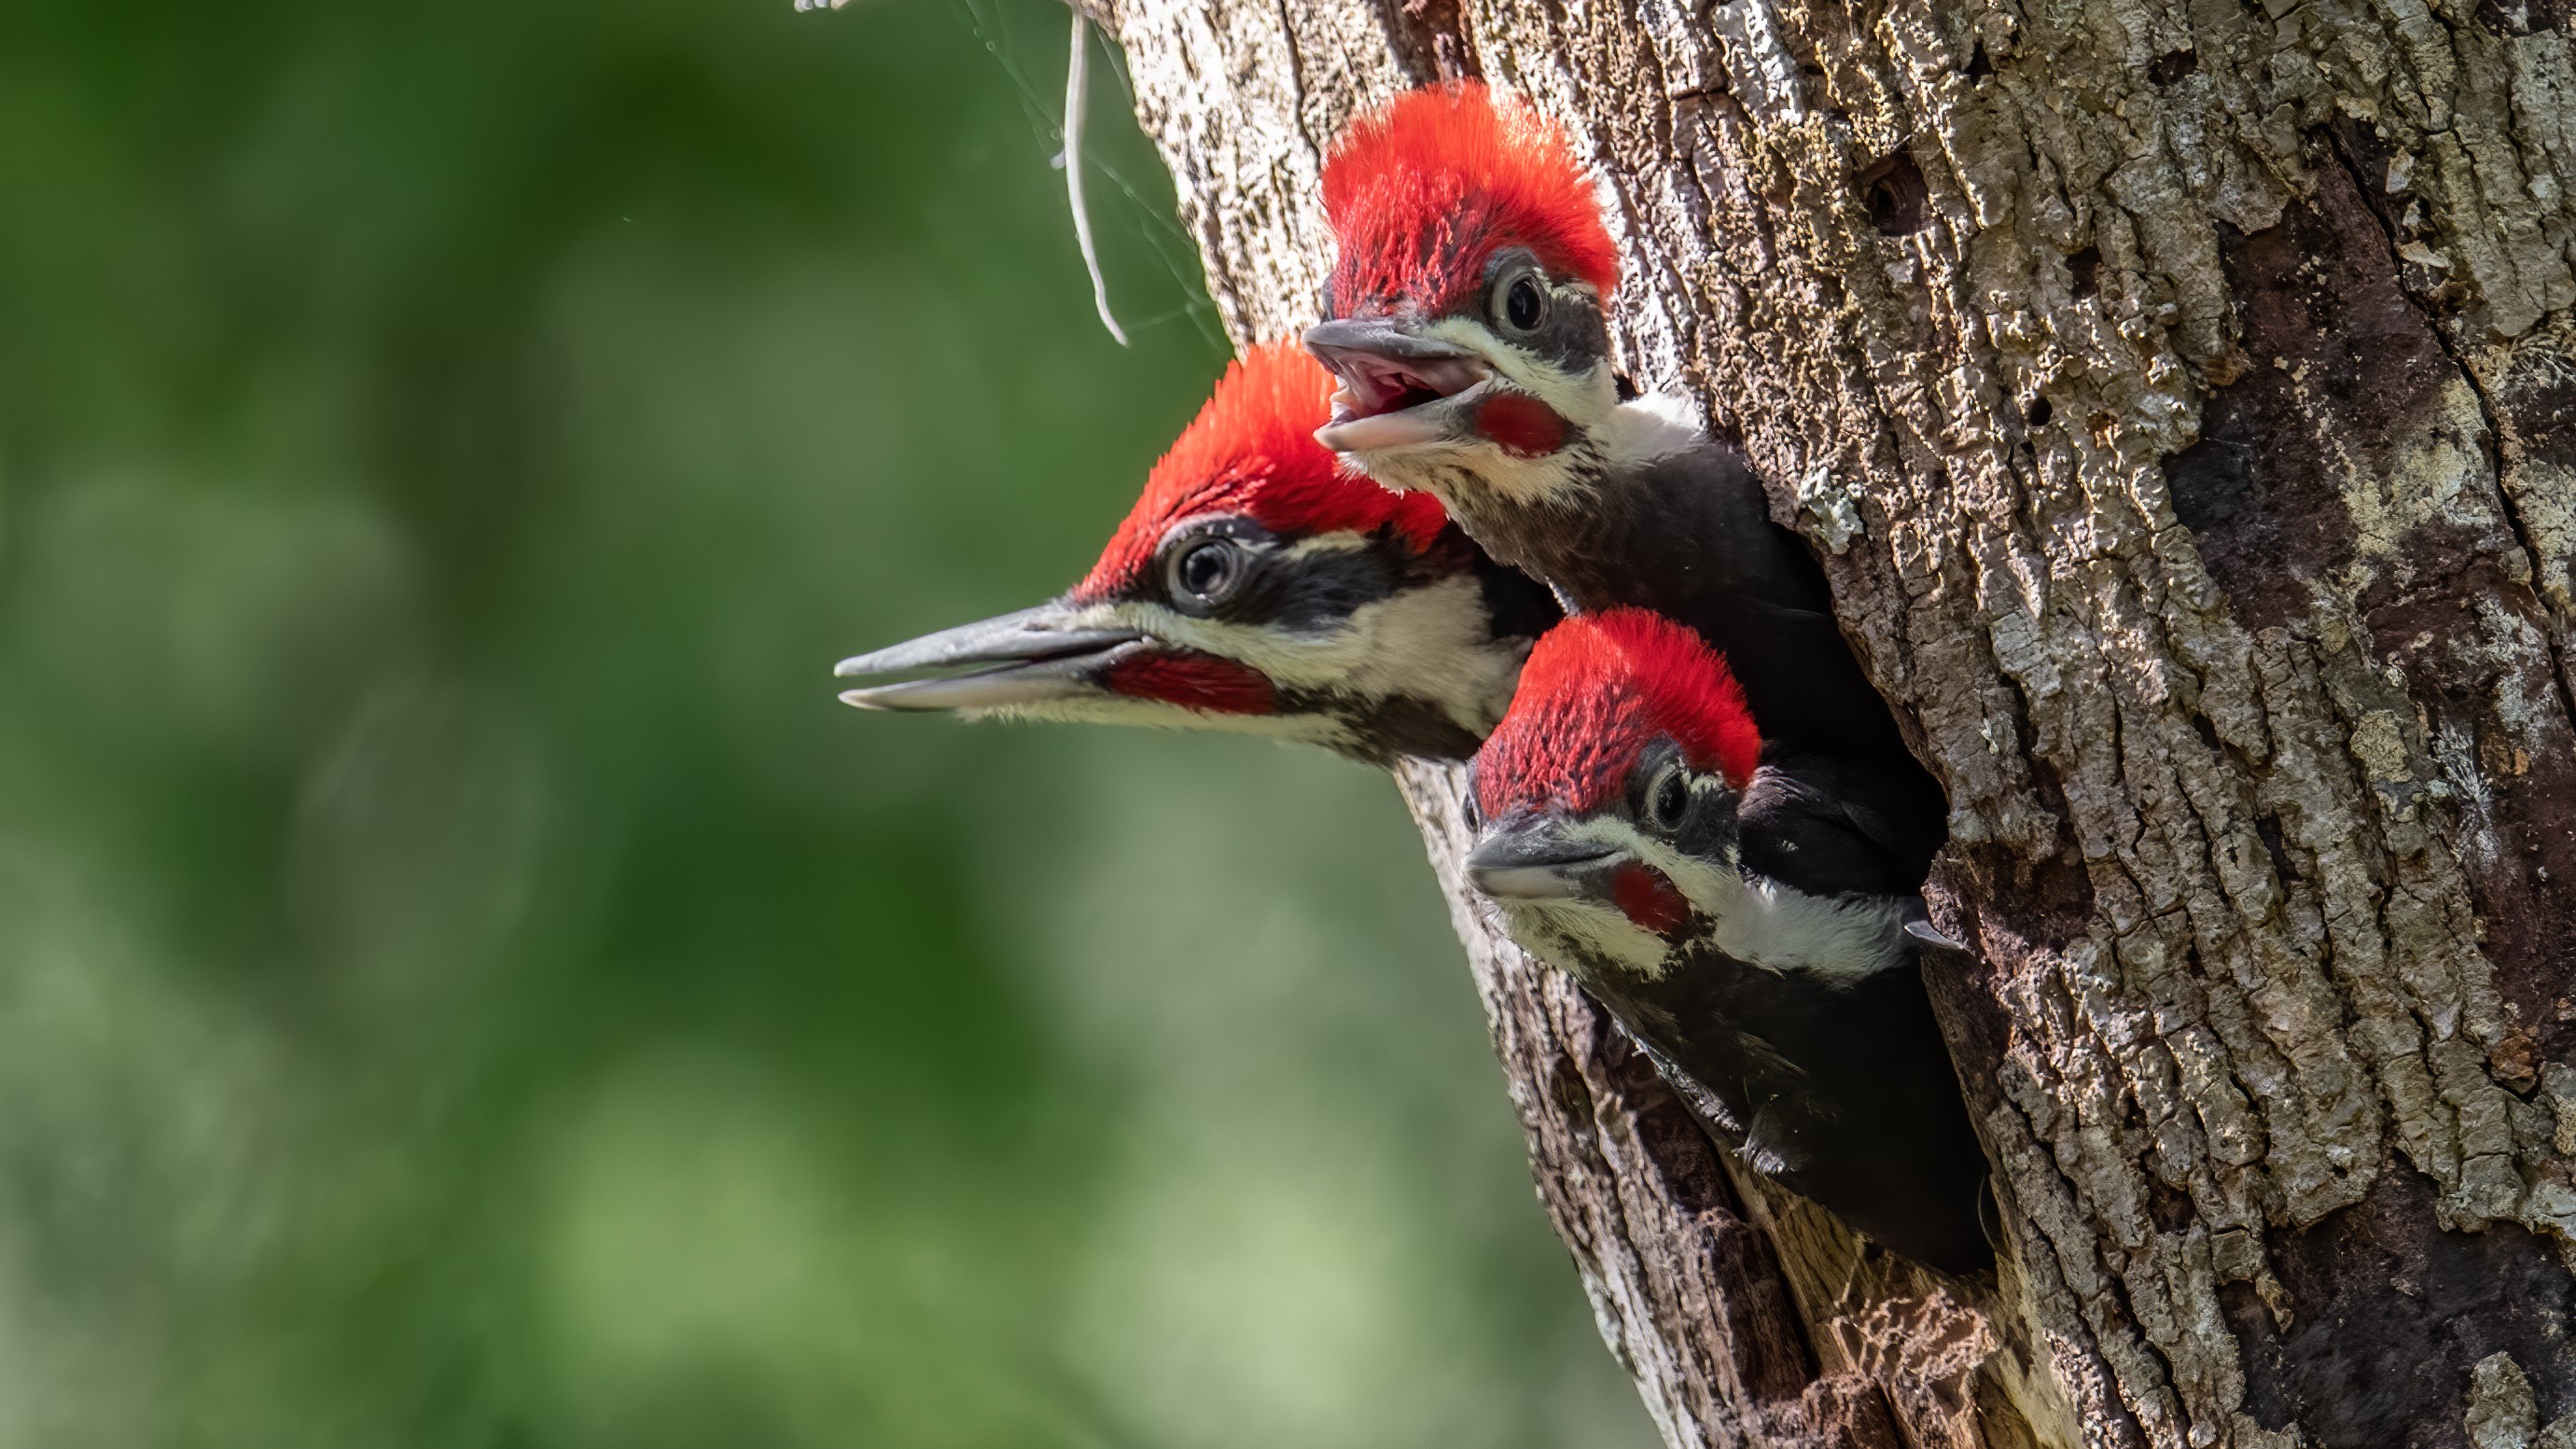 Three young pileated woodpeckers poking their head out of a tree cavity.